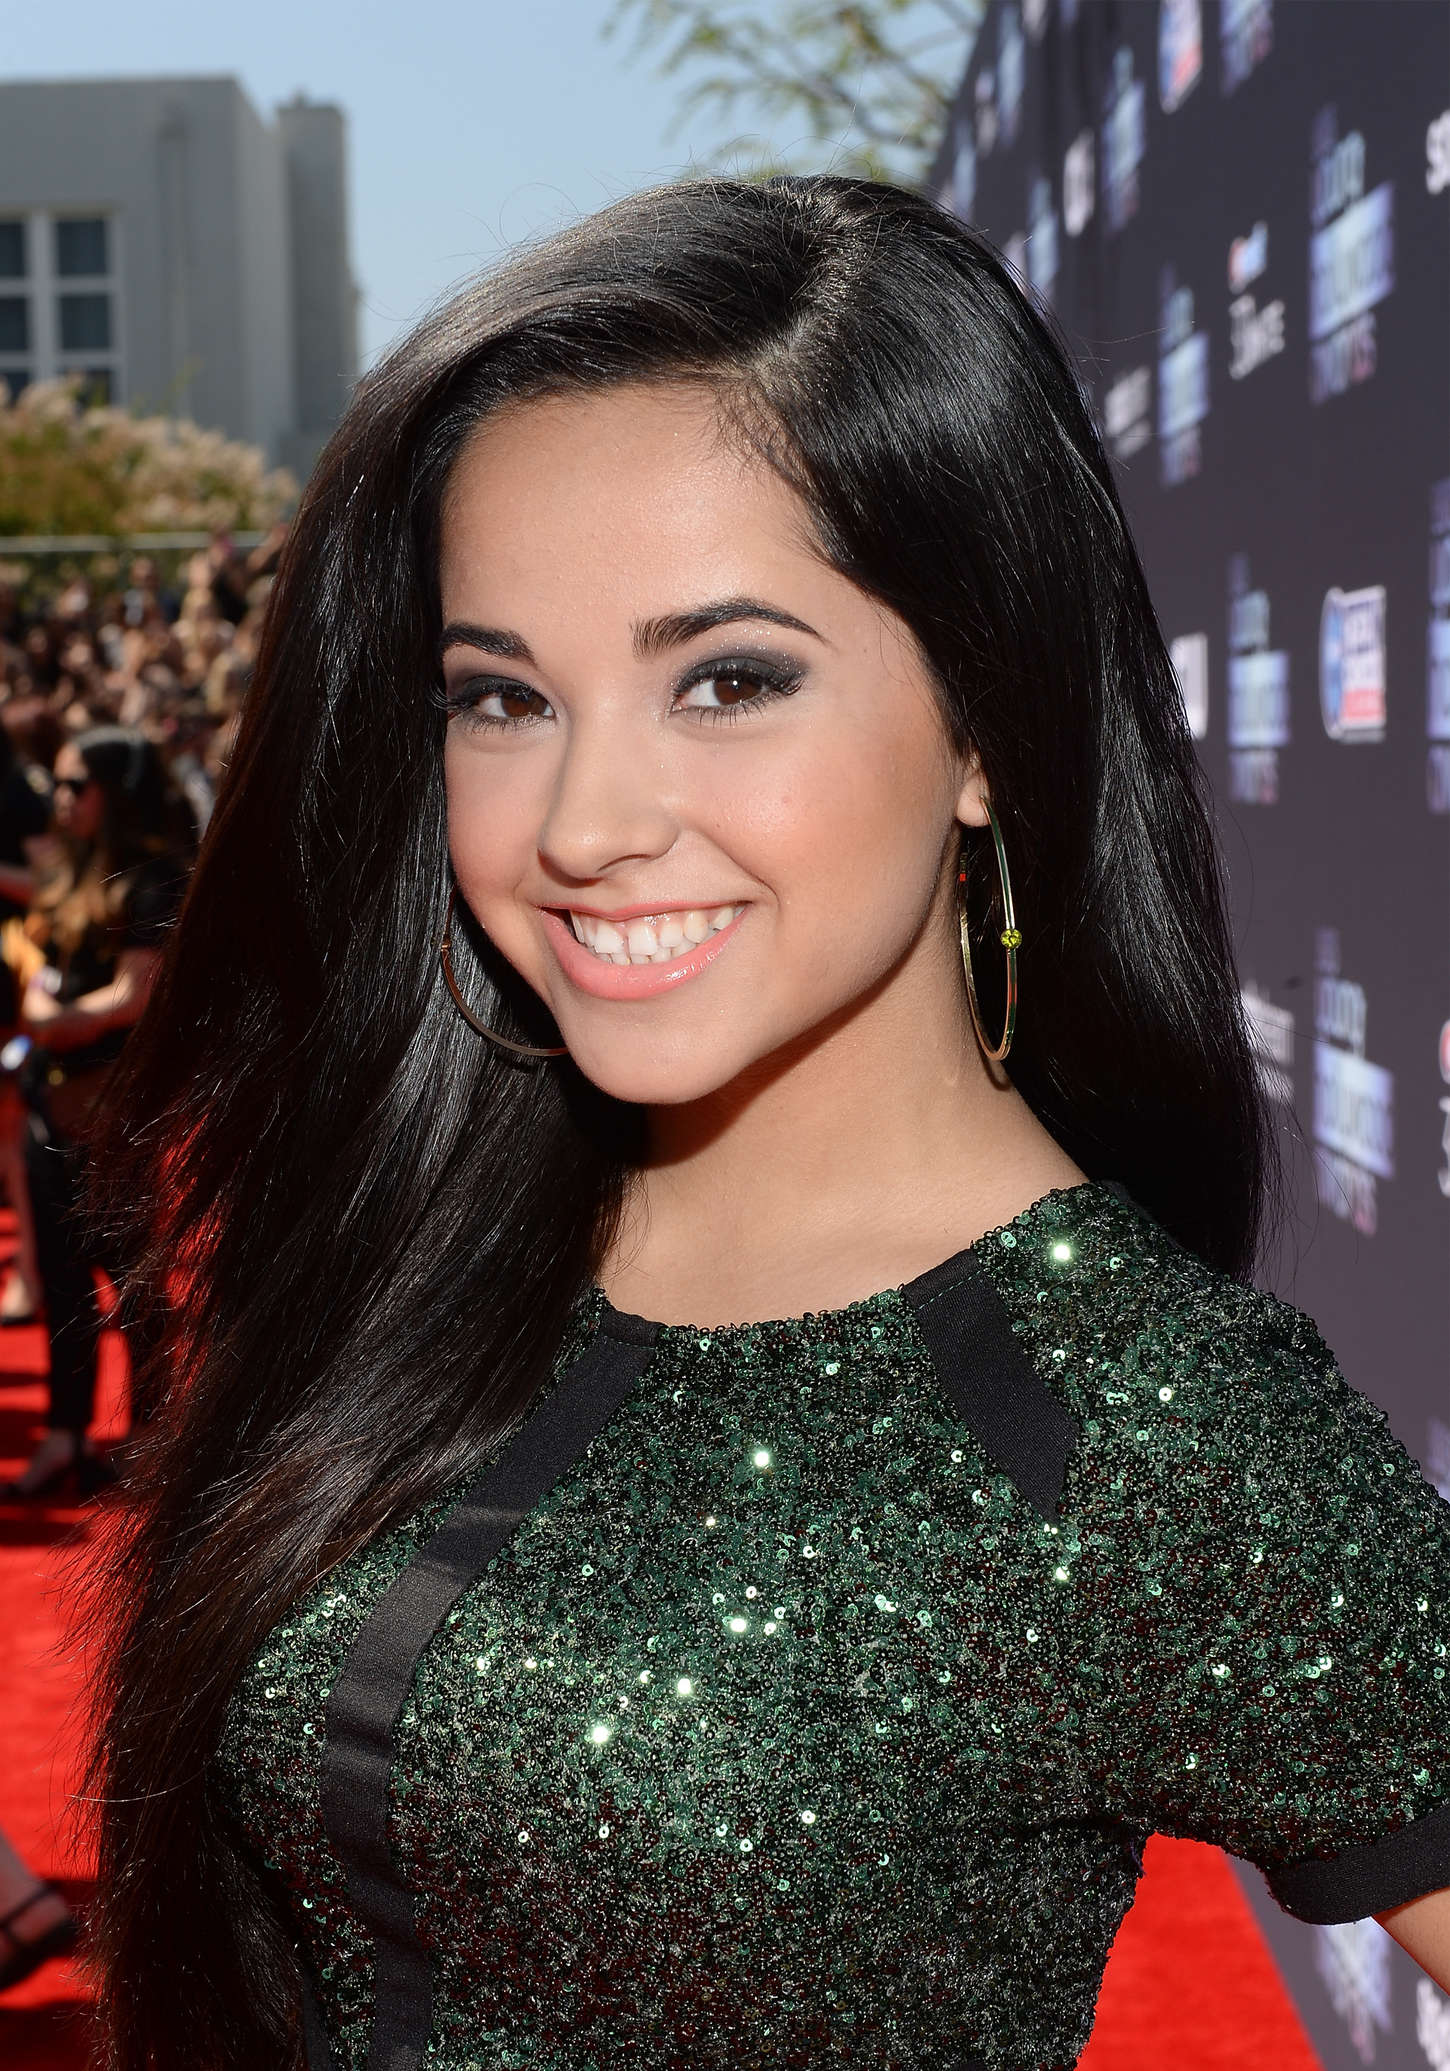 Becky G 2013 : Becky G (Rebecca Marie Gomez) - CW Networks 2013 Young Holly...